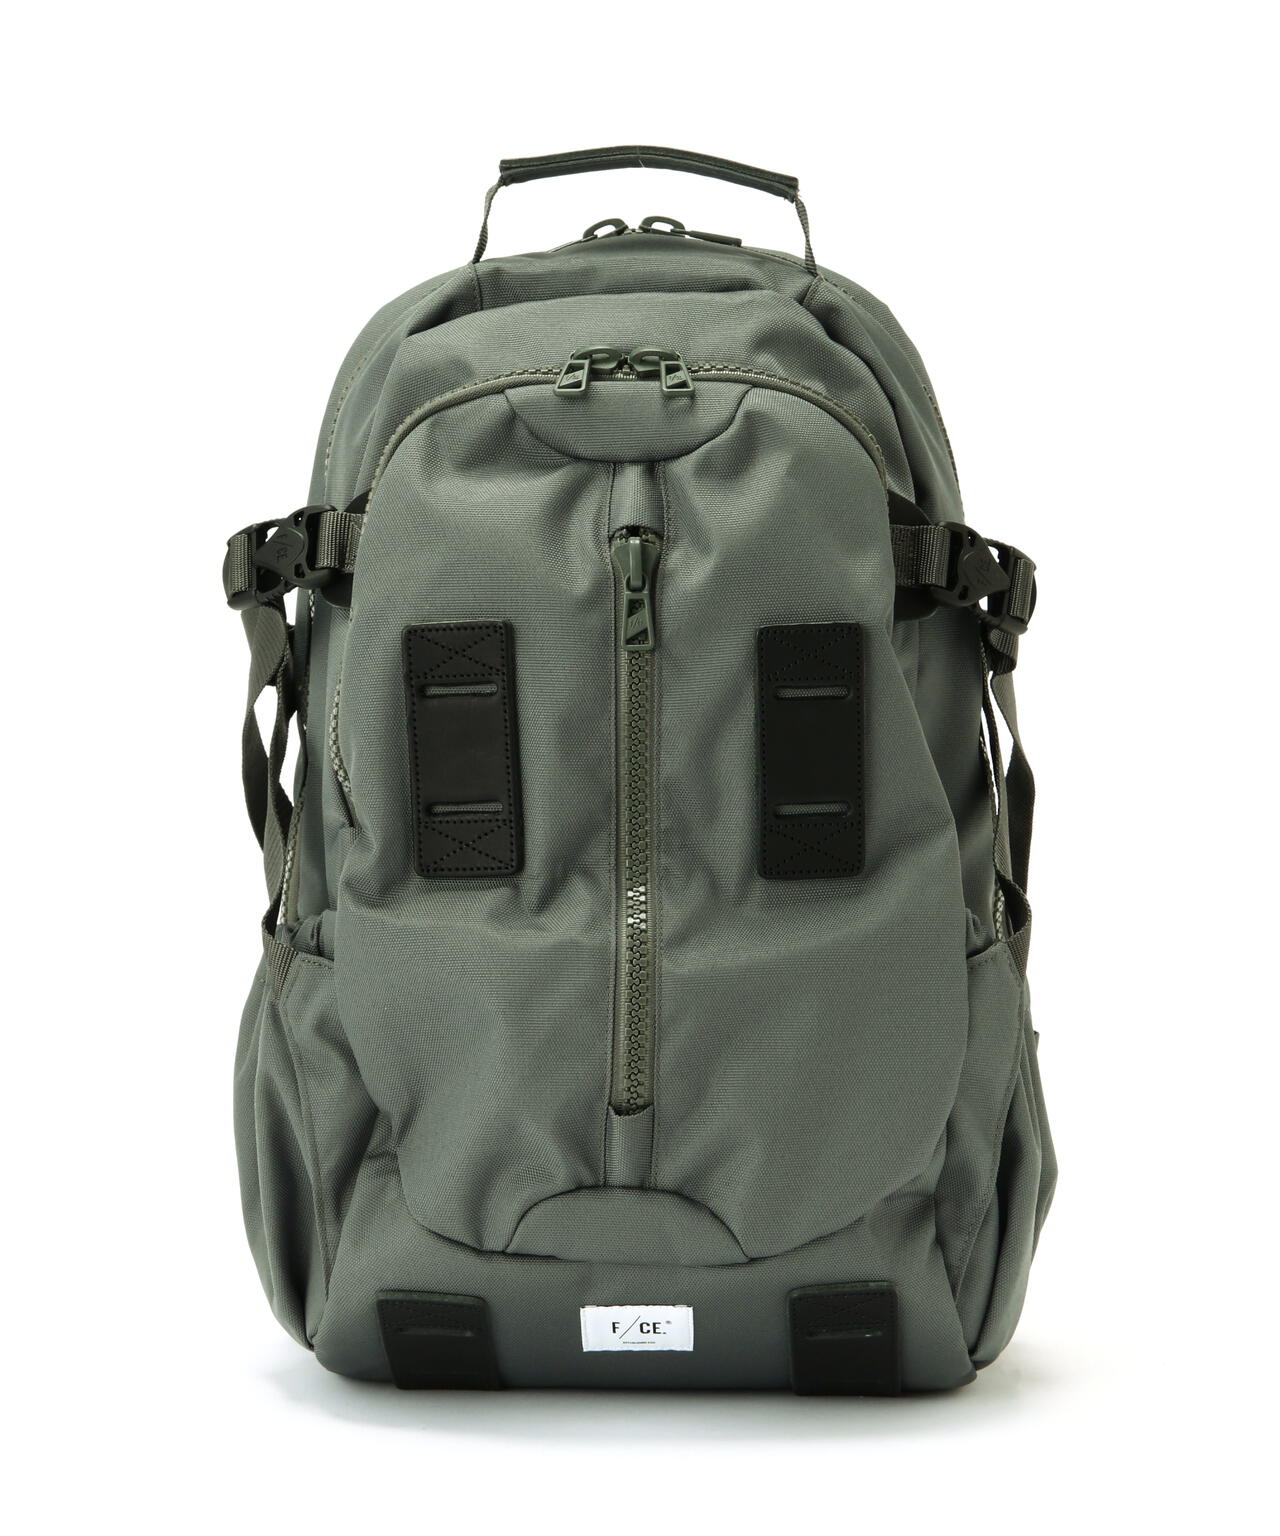 F/CE. 950 TRAVEL BACKPACK / 950 バックパック